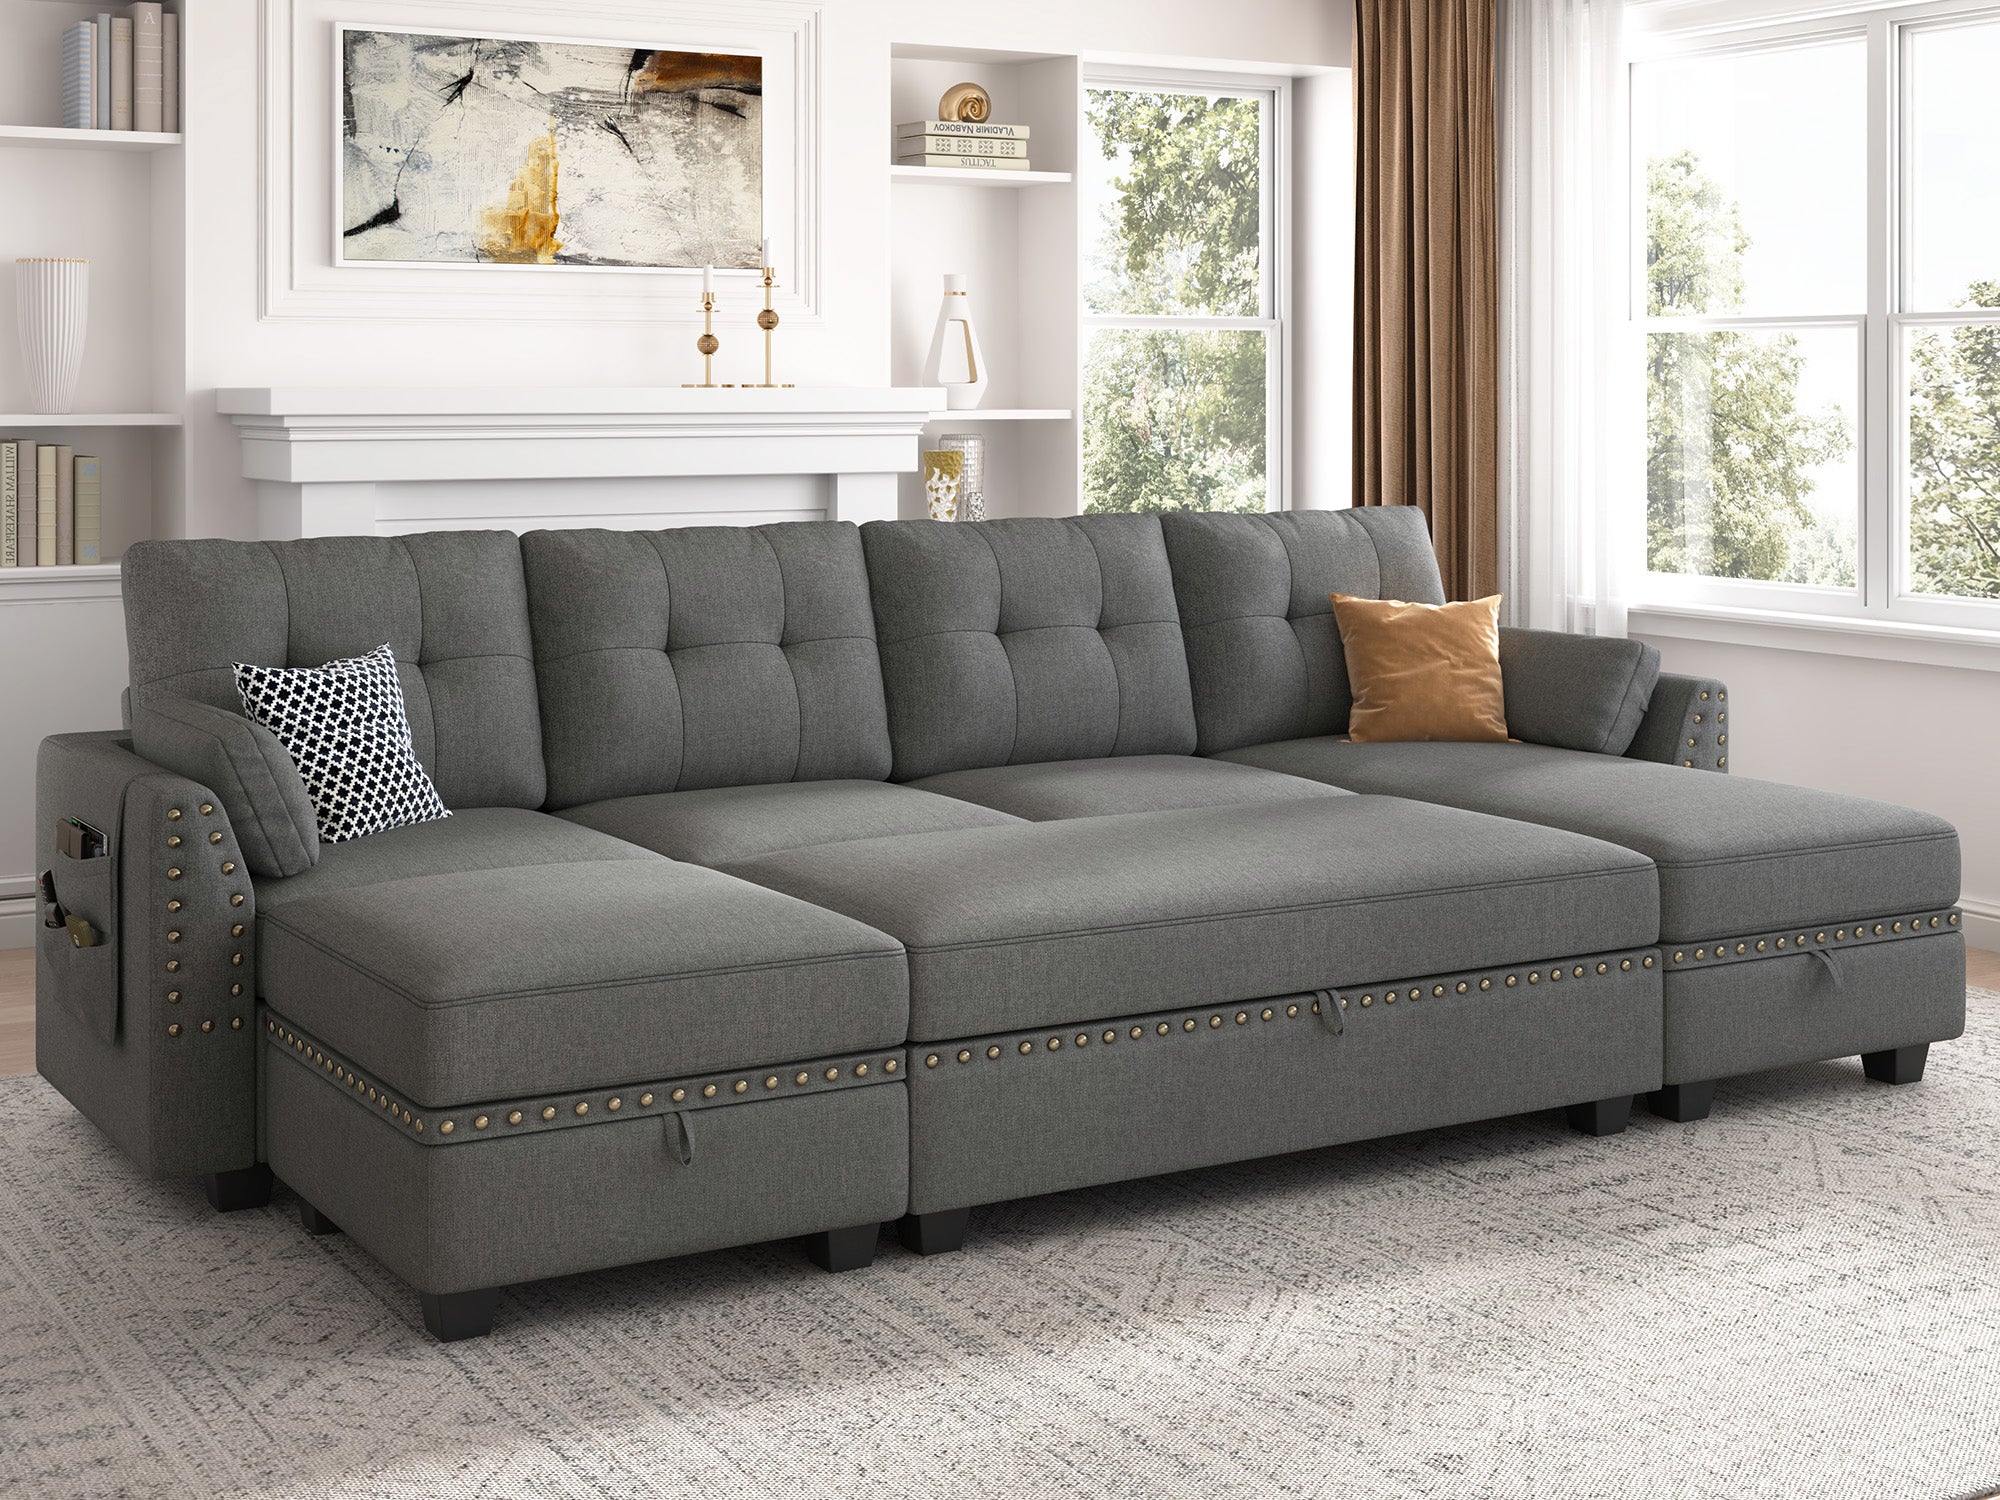 HONBAY 4-Seat Sectional Sofa Sleeper with Storage